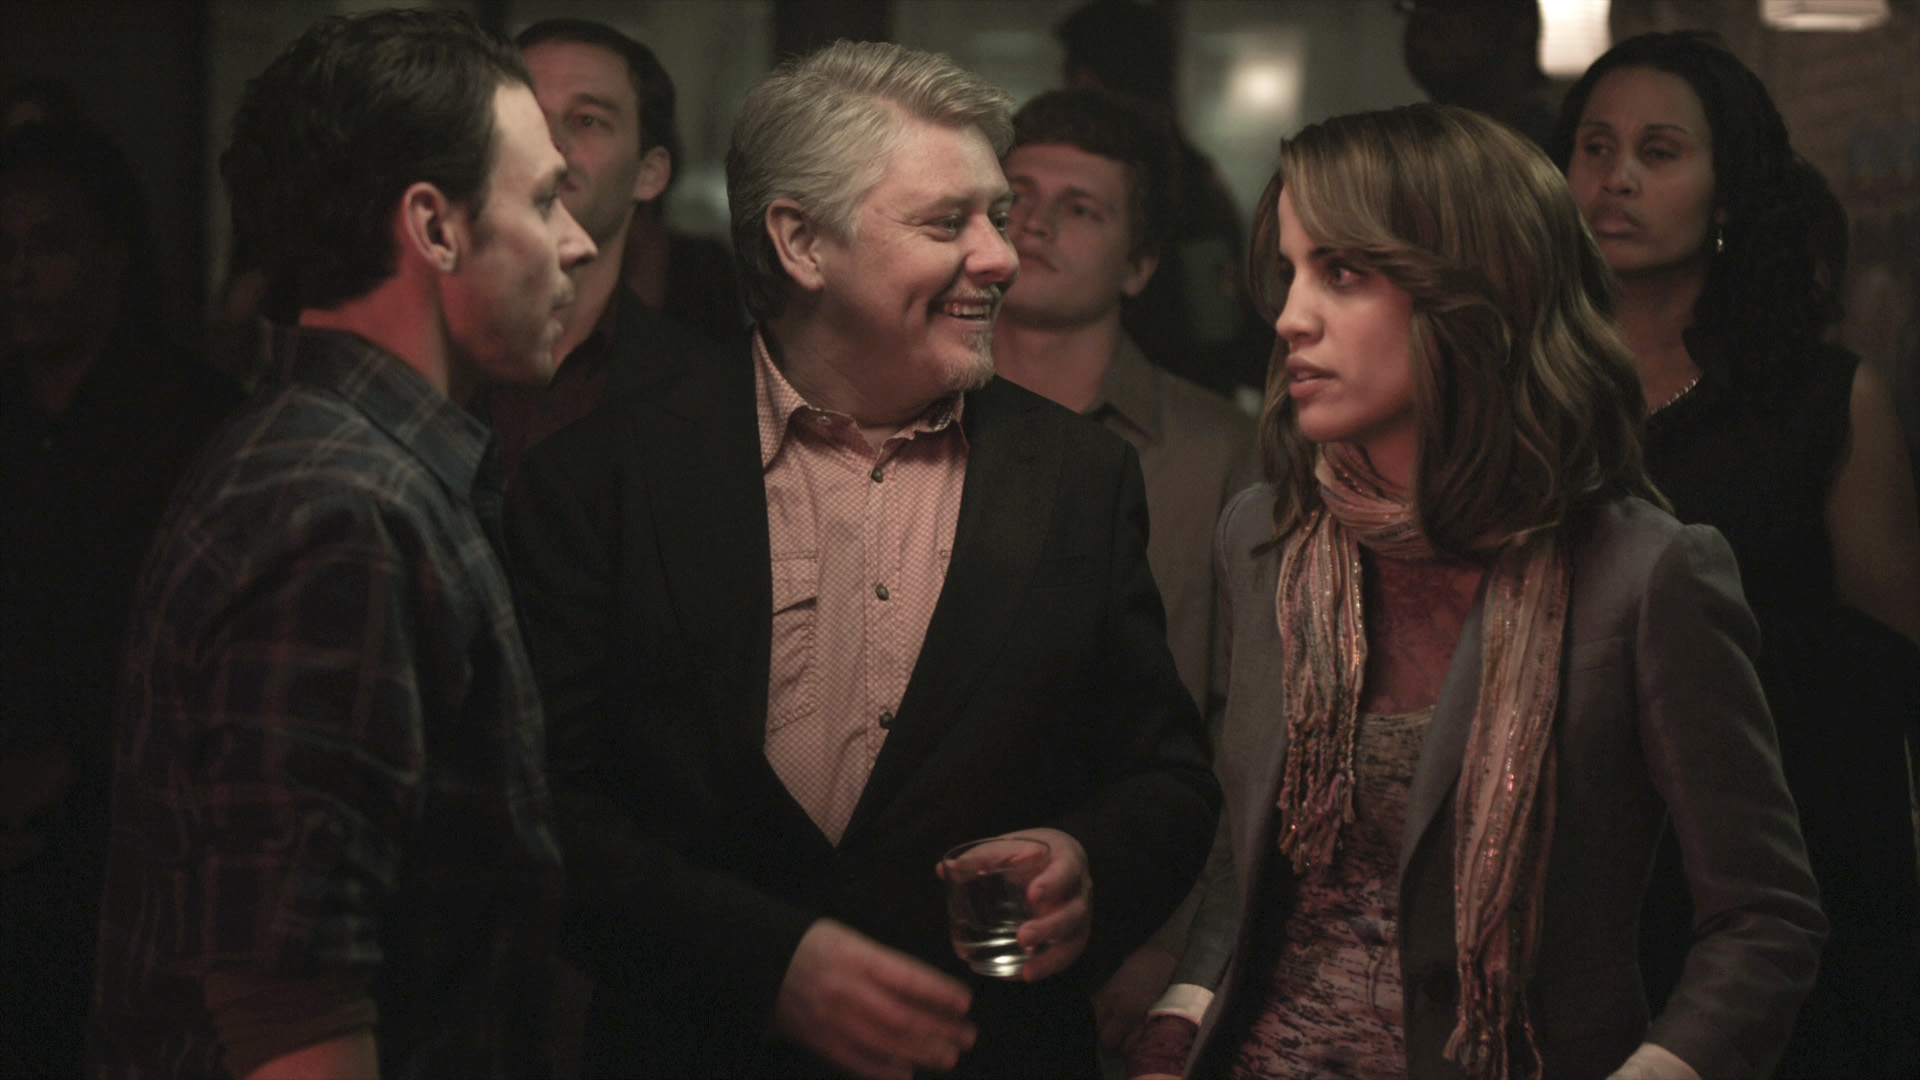 Blayne Weaver, Dave Foley and Natalie Morales in Abramorama's 6 Month Rule (2012)